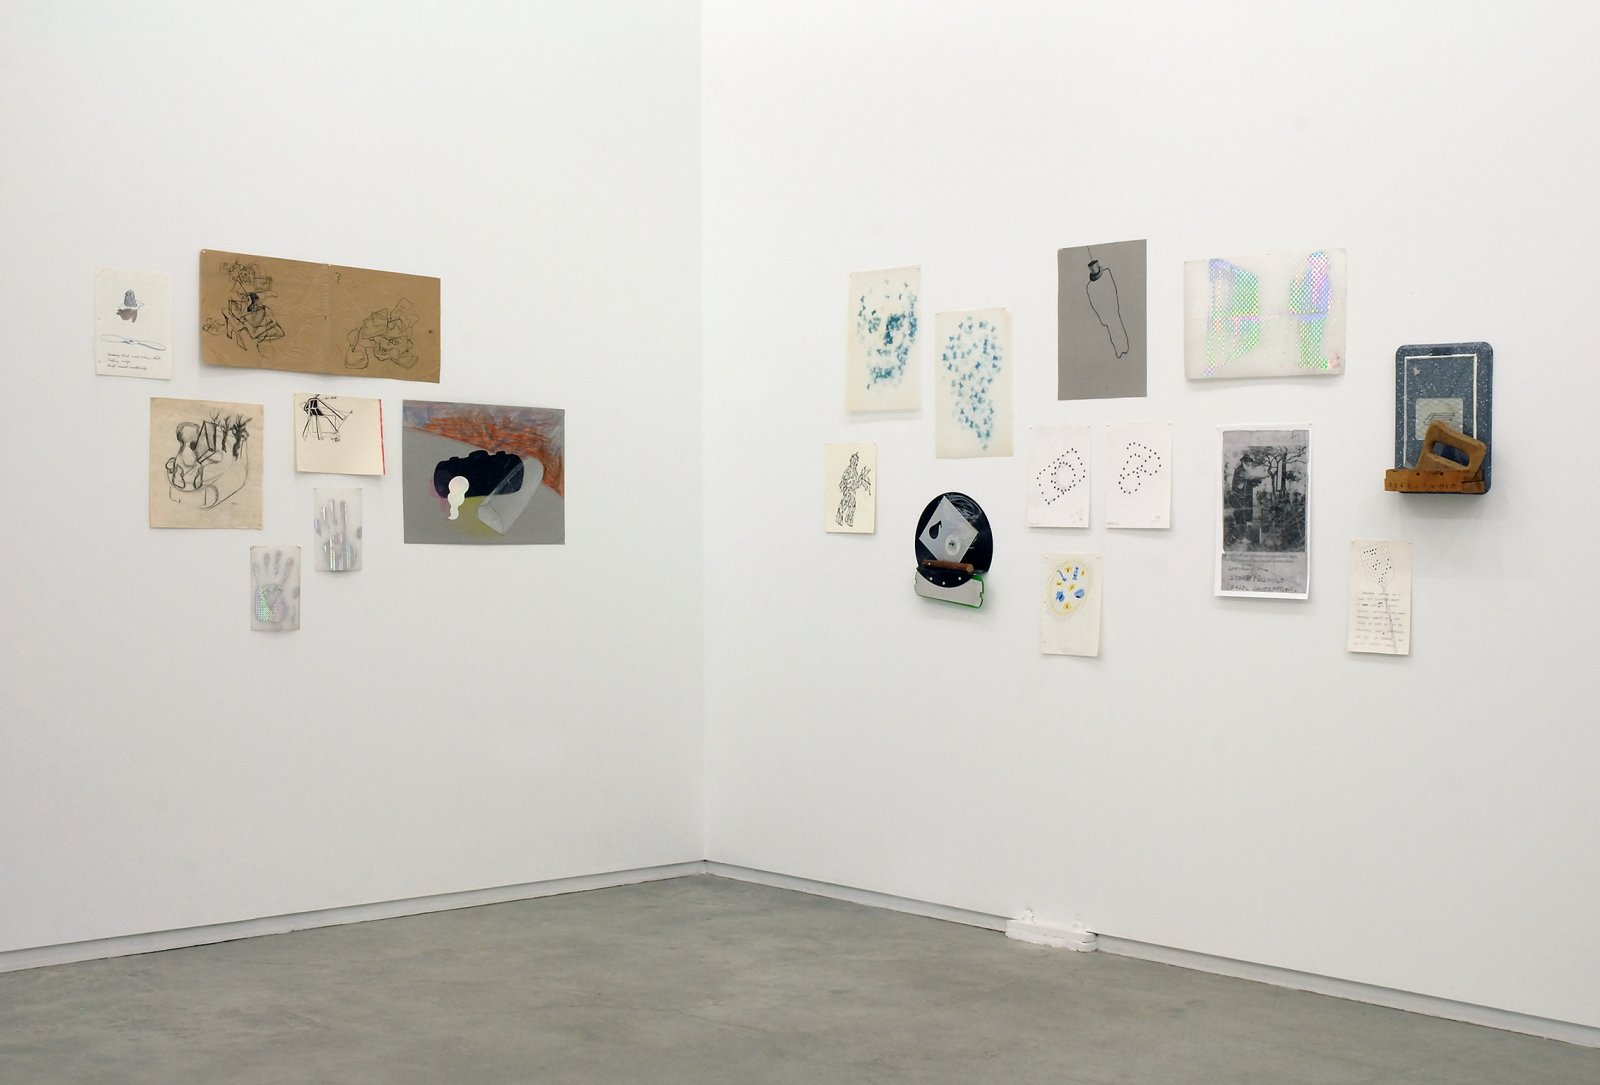 Jerry Pethick, installation view, Catriona Jeffries, 2008  by Jerry Pethick